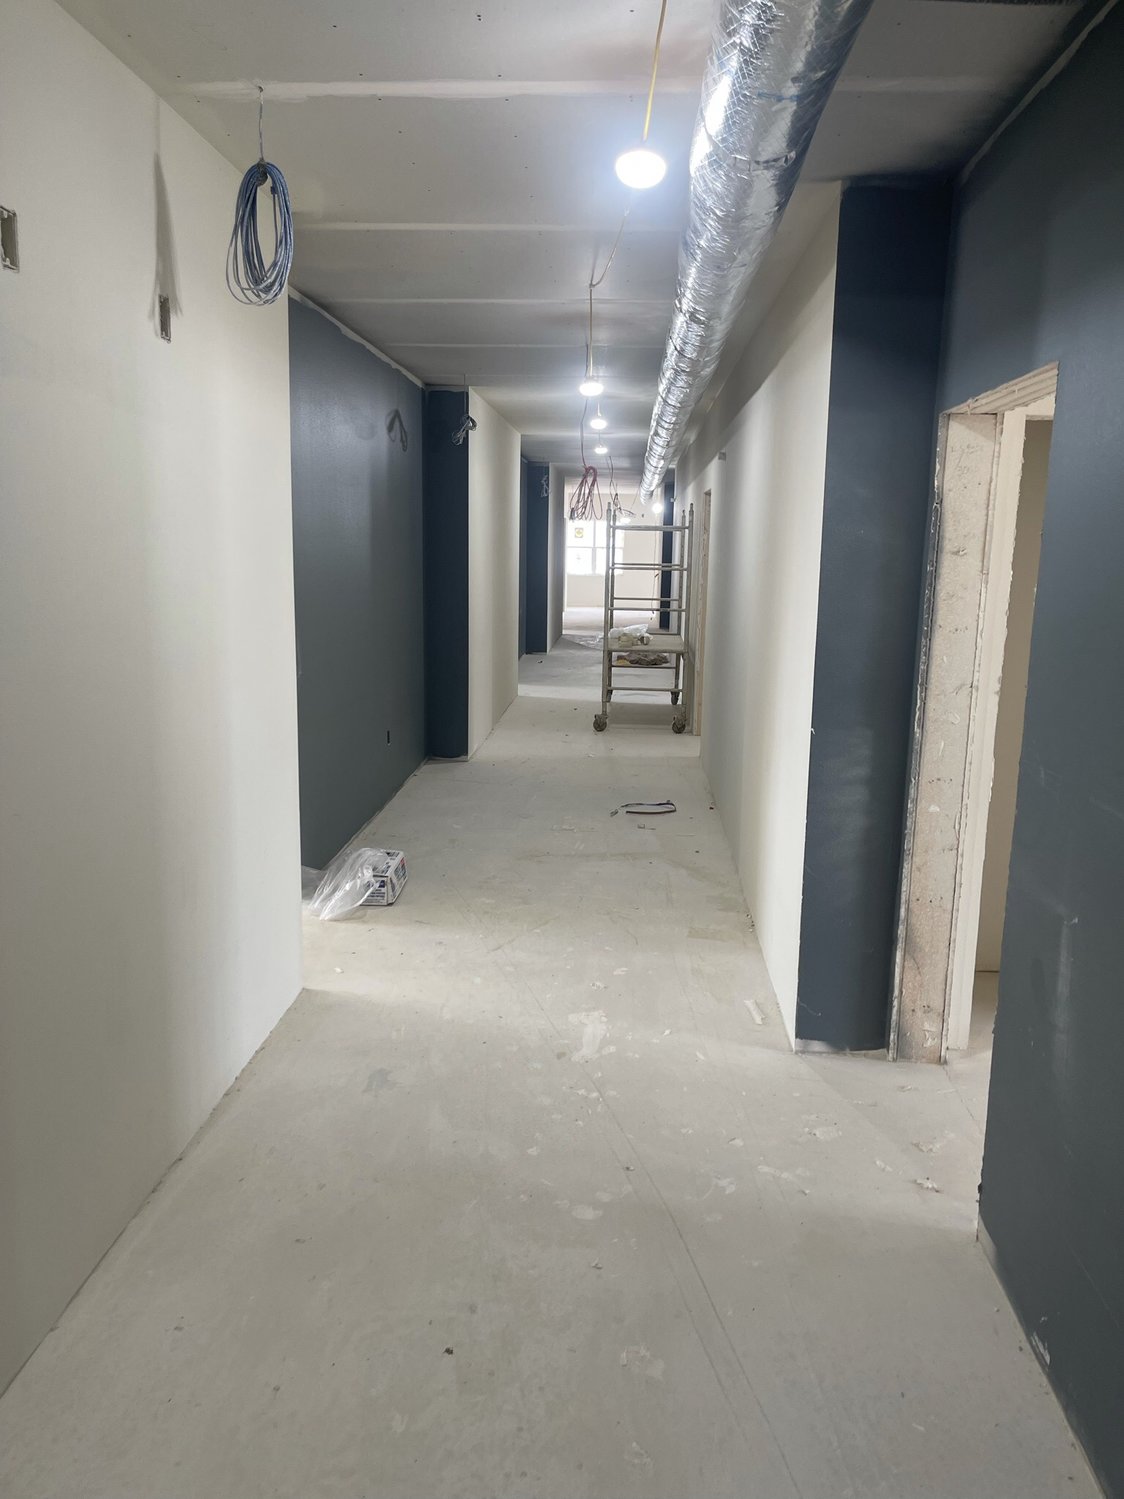 Painting has begun too - hallways on 2nd and 3rd floors, these are where the Independent, Assisted and Closer Care apartments are located.